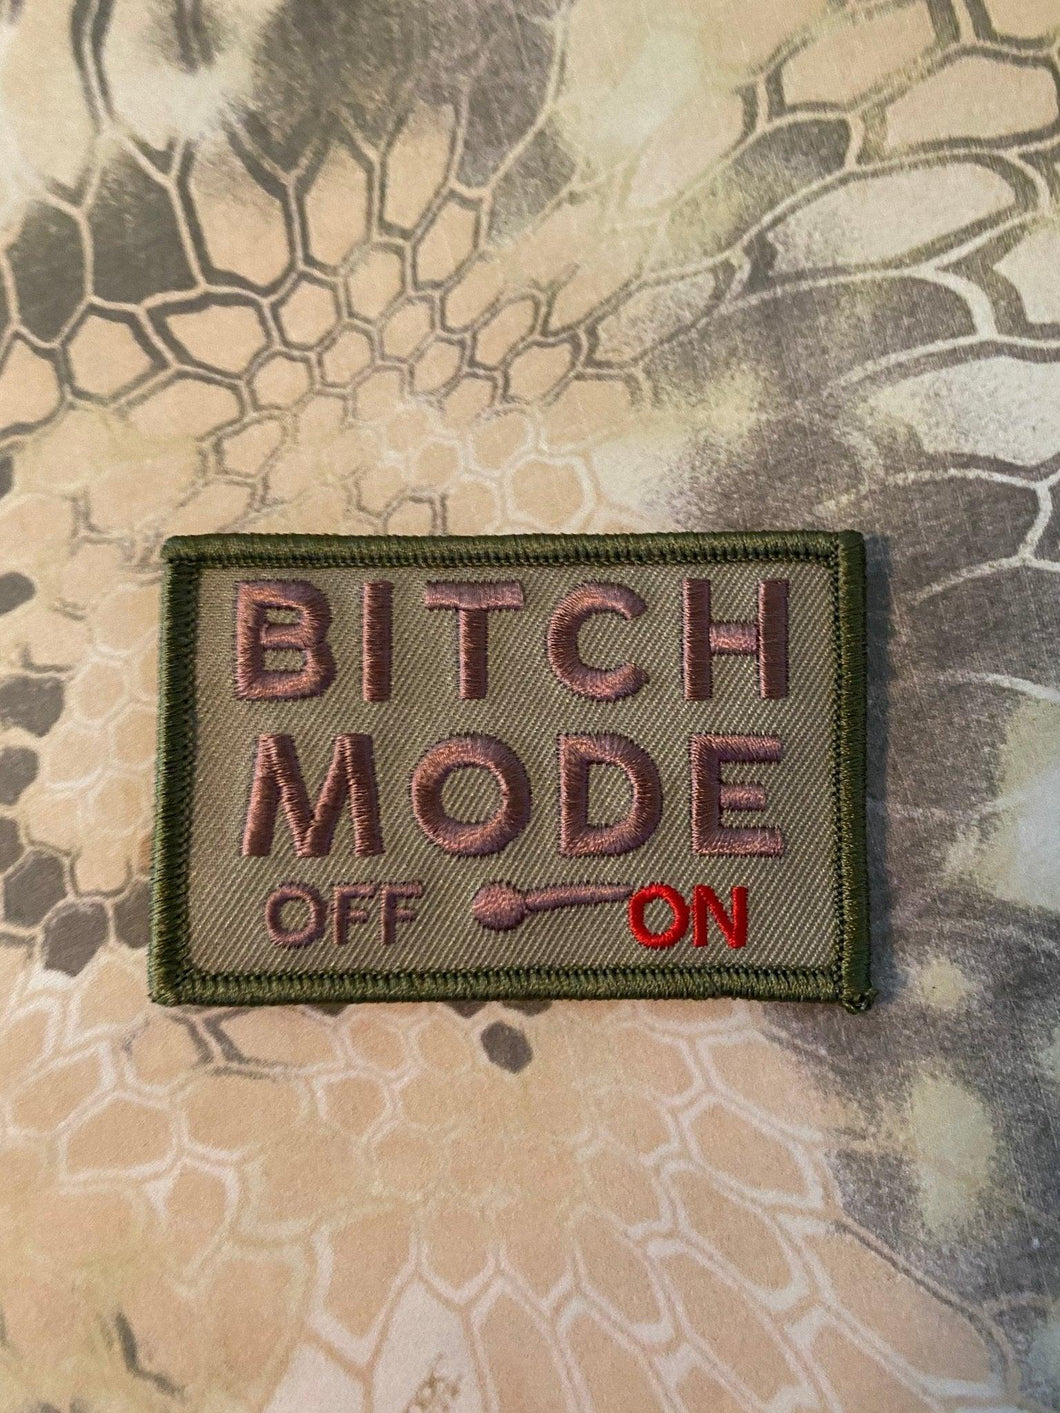 bitch mode on off meter funny morale 3x2